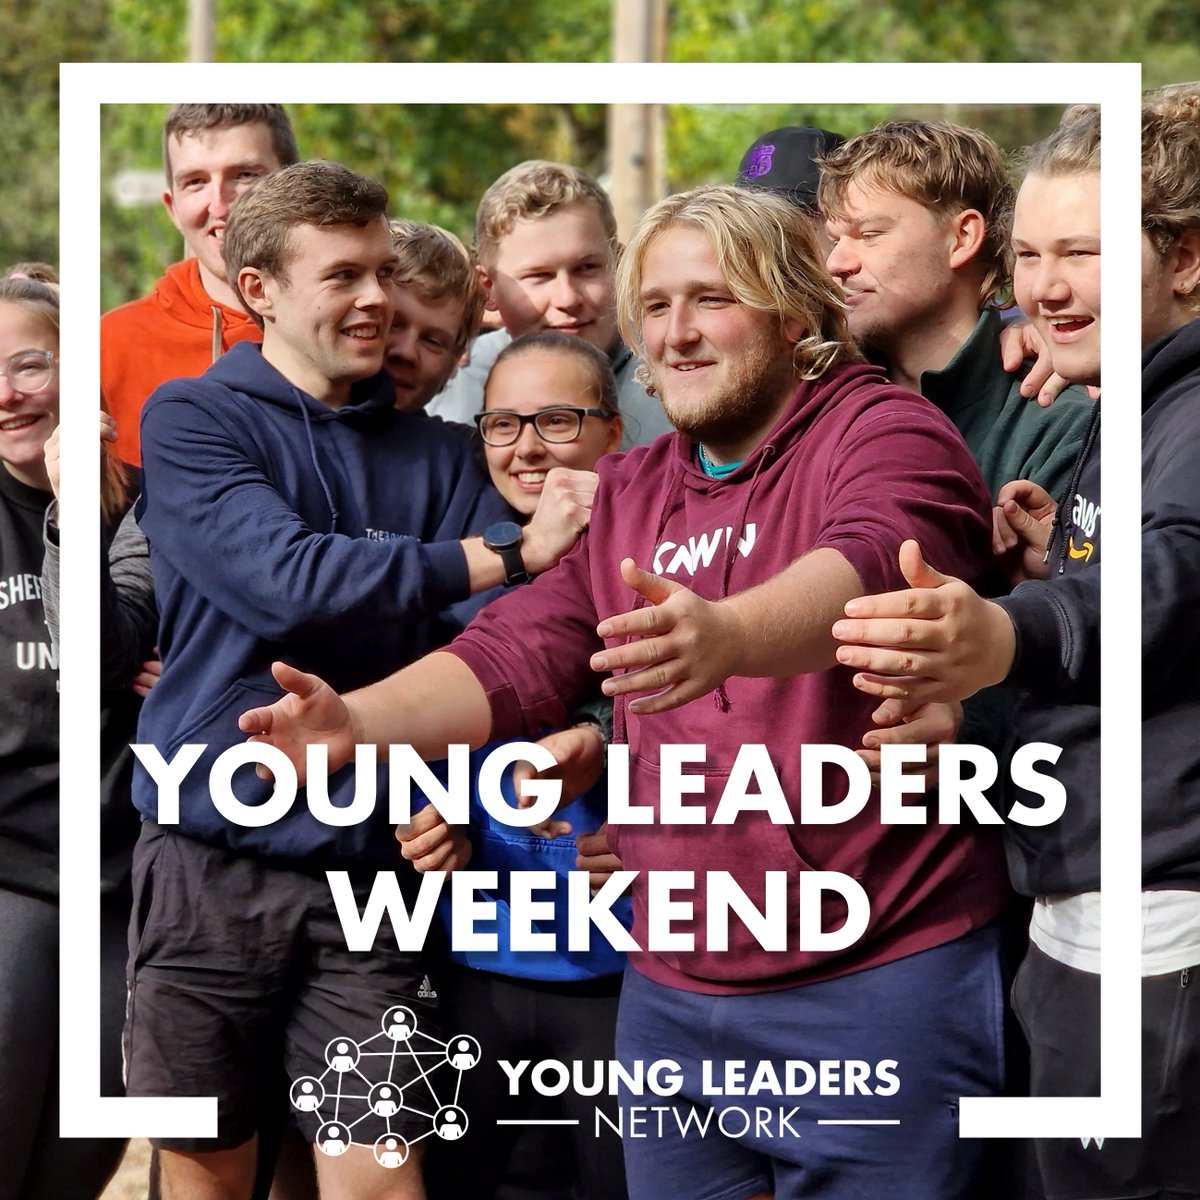 This weekend leaders aged 18-26 from across the country are coming together at Carronvale House for our Young Leaders Weekend 🙌 We'll be sharing what they're getting up to over the next couple of days on our Instagram Stories so be sure to check it out! #BBYoungLeaders